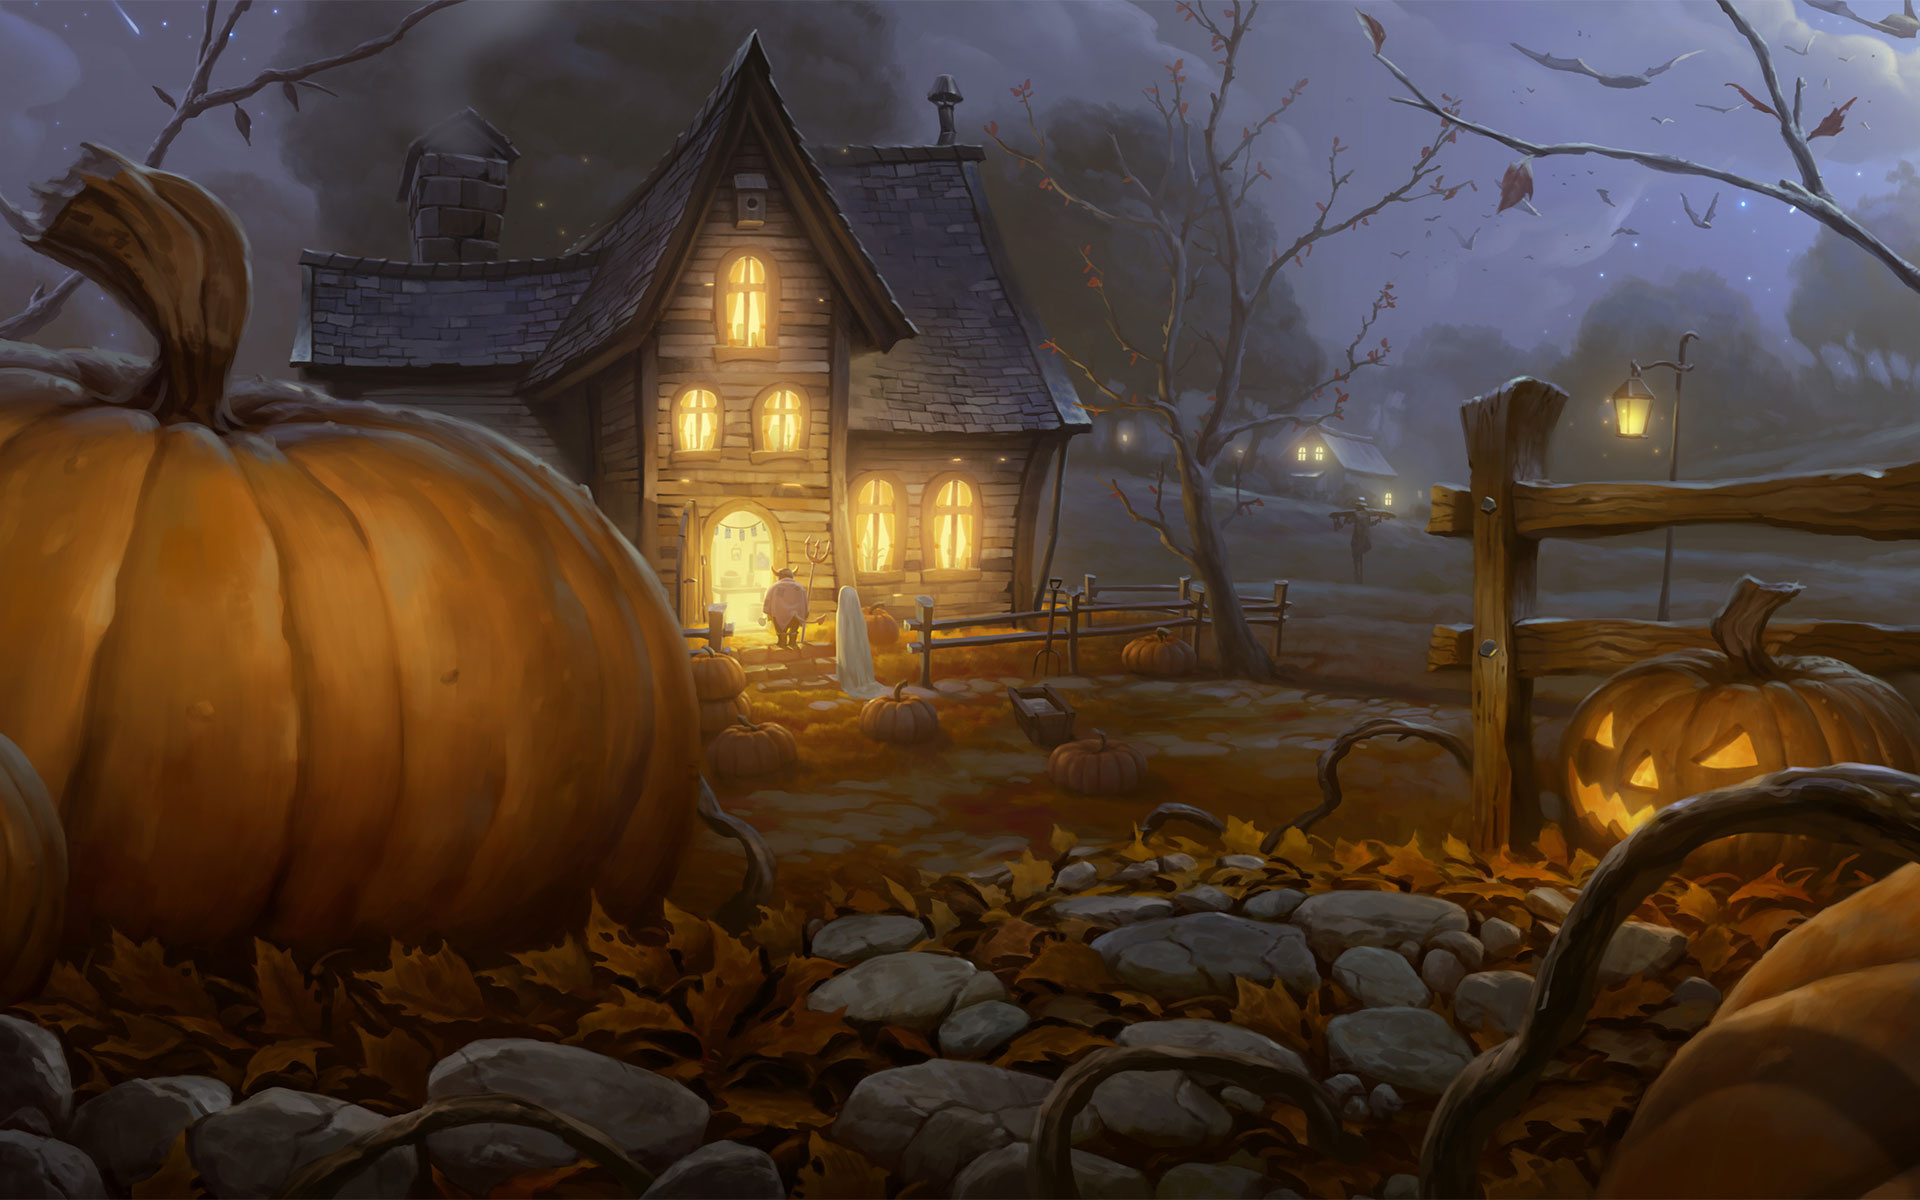 Halloween Haunted House, Scary wallpapers, Pumpkins and witches, 1920x1200 HD Desktop